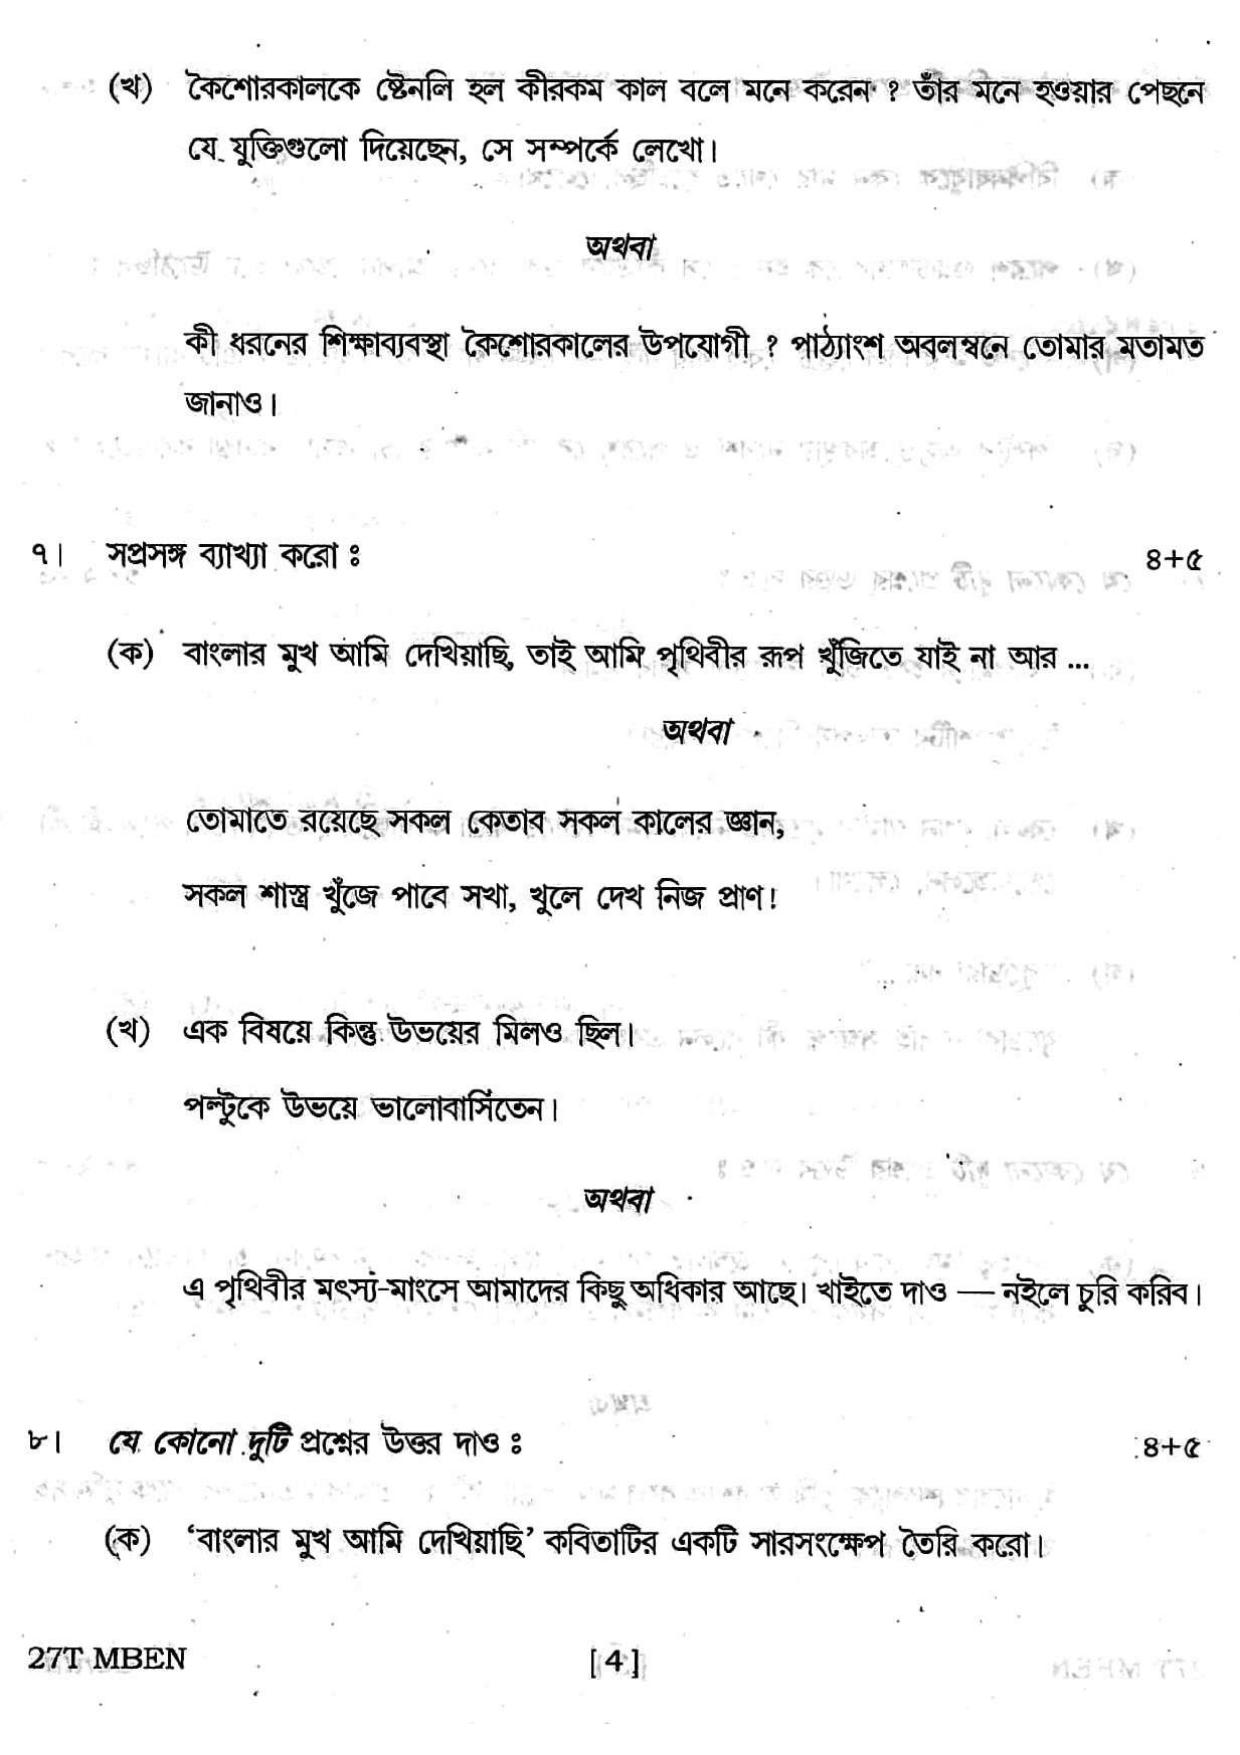 Assam HS 2nd Year Bengali MIL 2017 Question Paper - Page 4